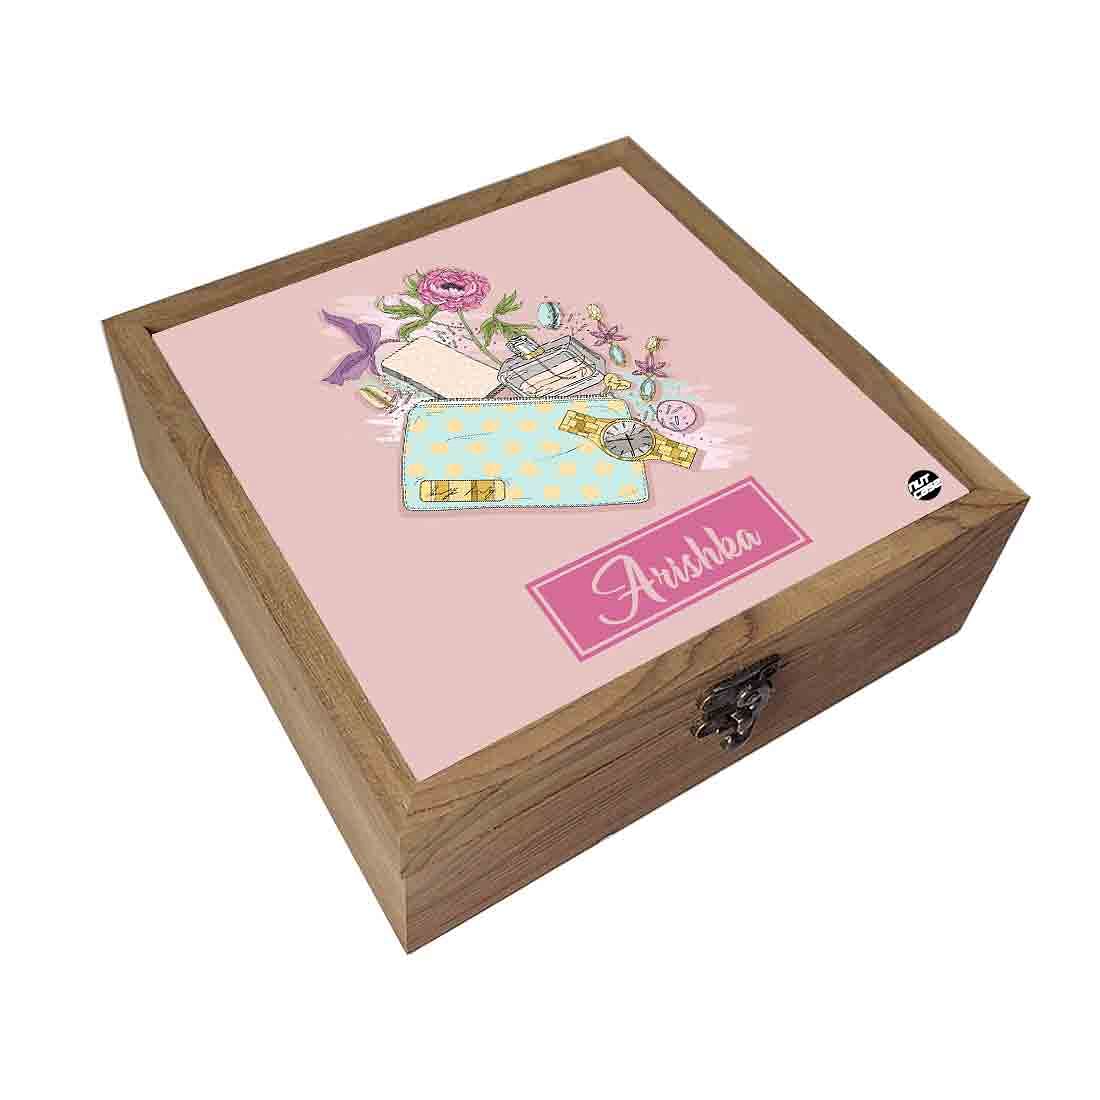 Customized Jewellery and Makeup Box for Girls  - Rose Perfume Nutcase